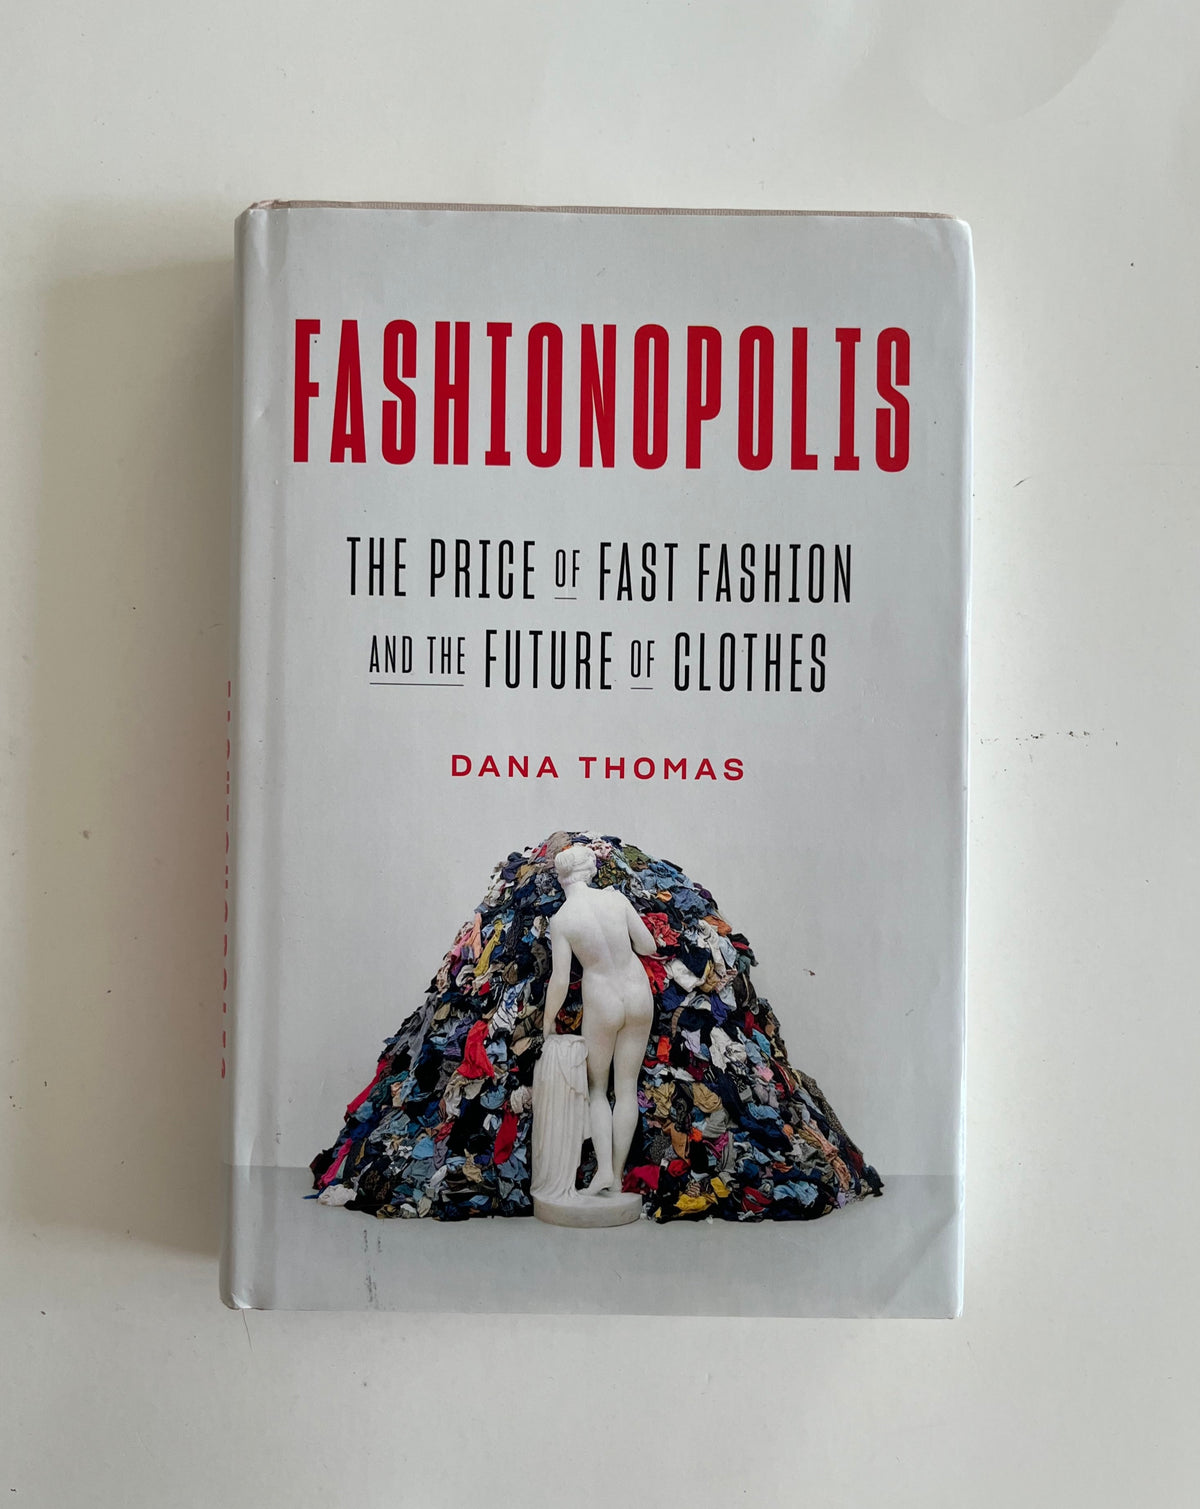 Fashionopolis: The Price of Fast Fashion and the Future of Clothes by Dana Thomas